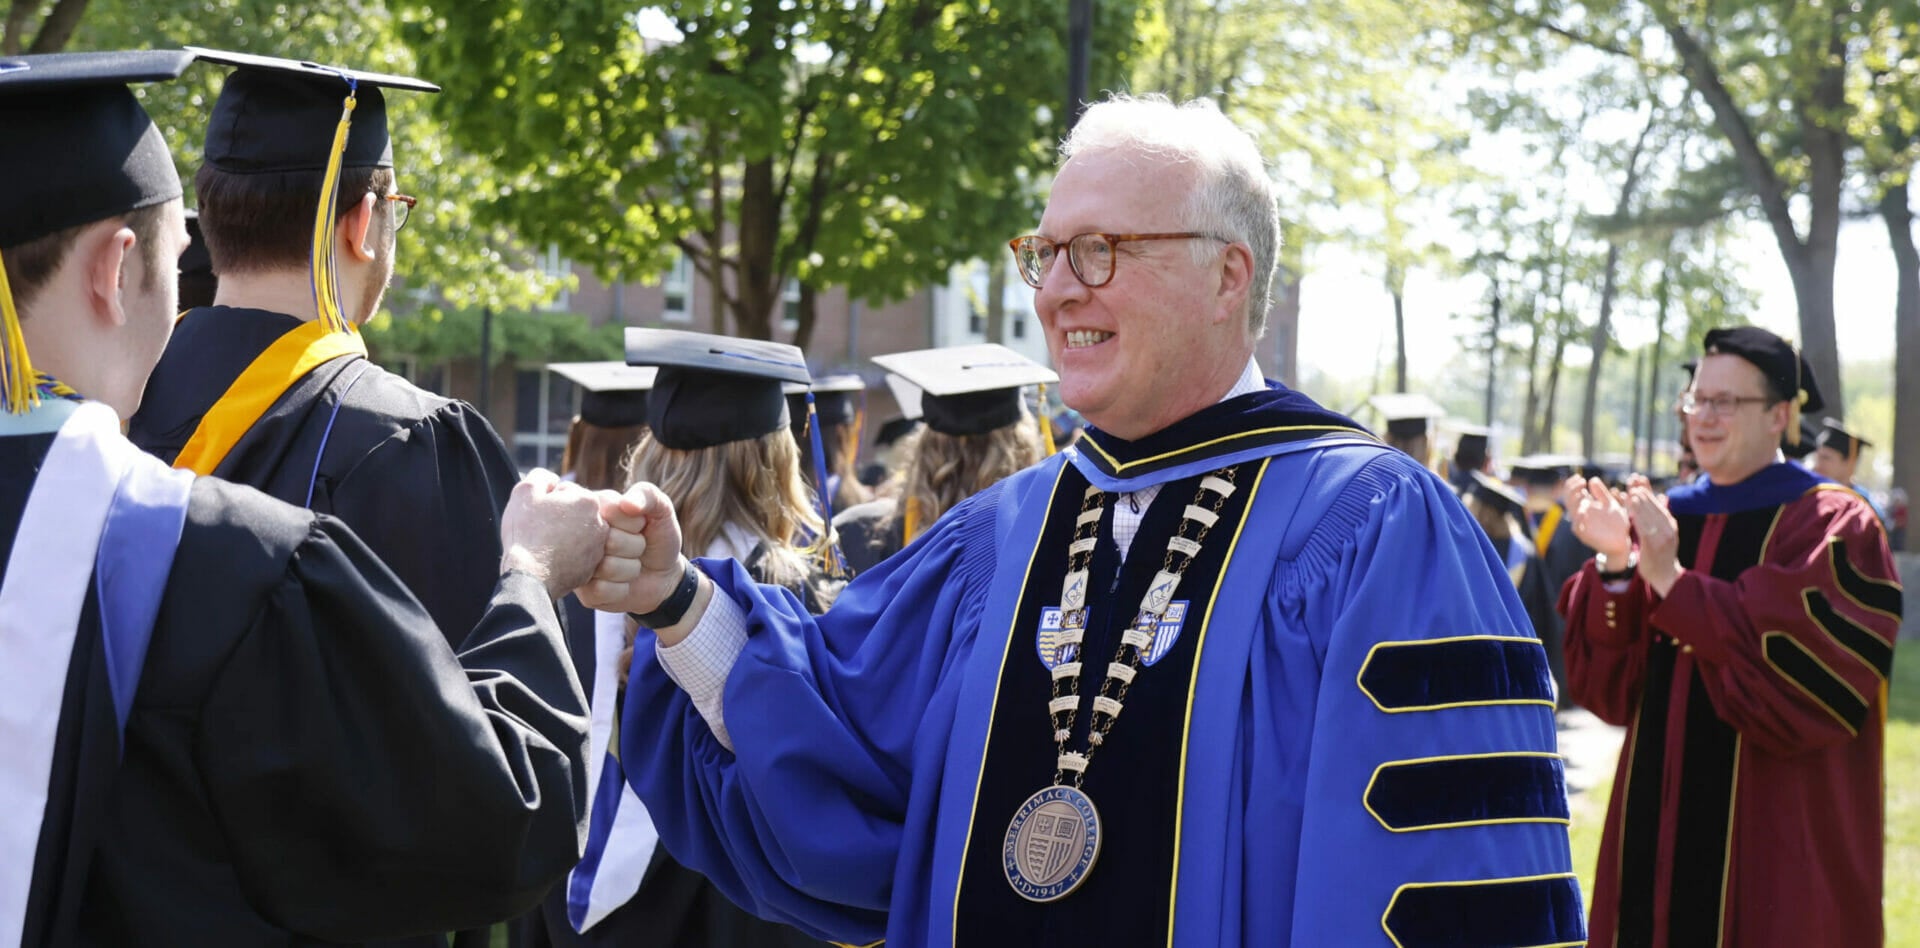 President Hopey fist bumps student dressed in regalia